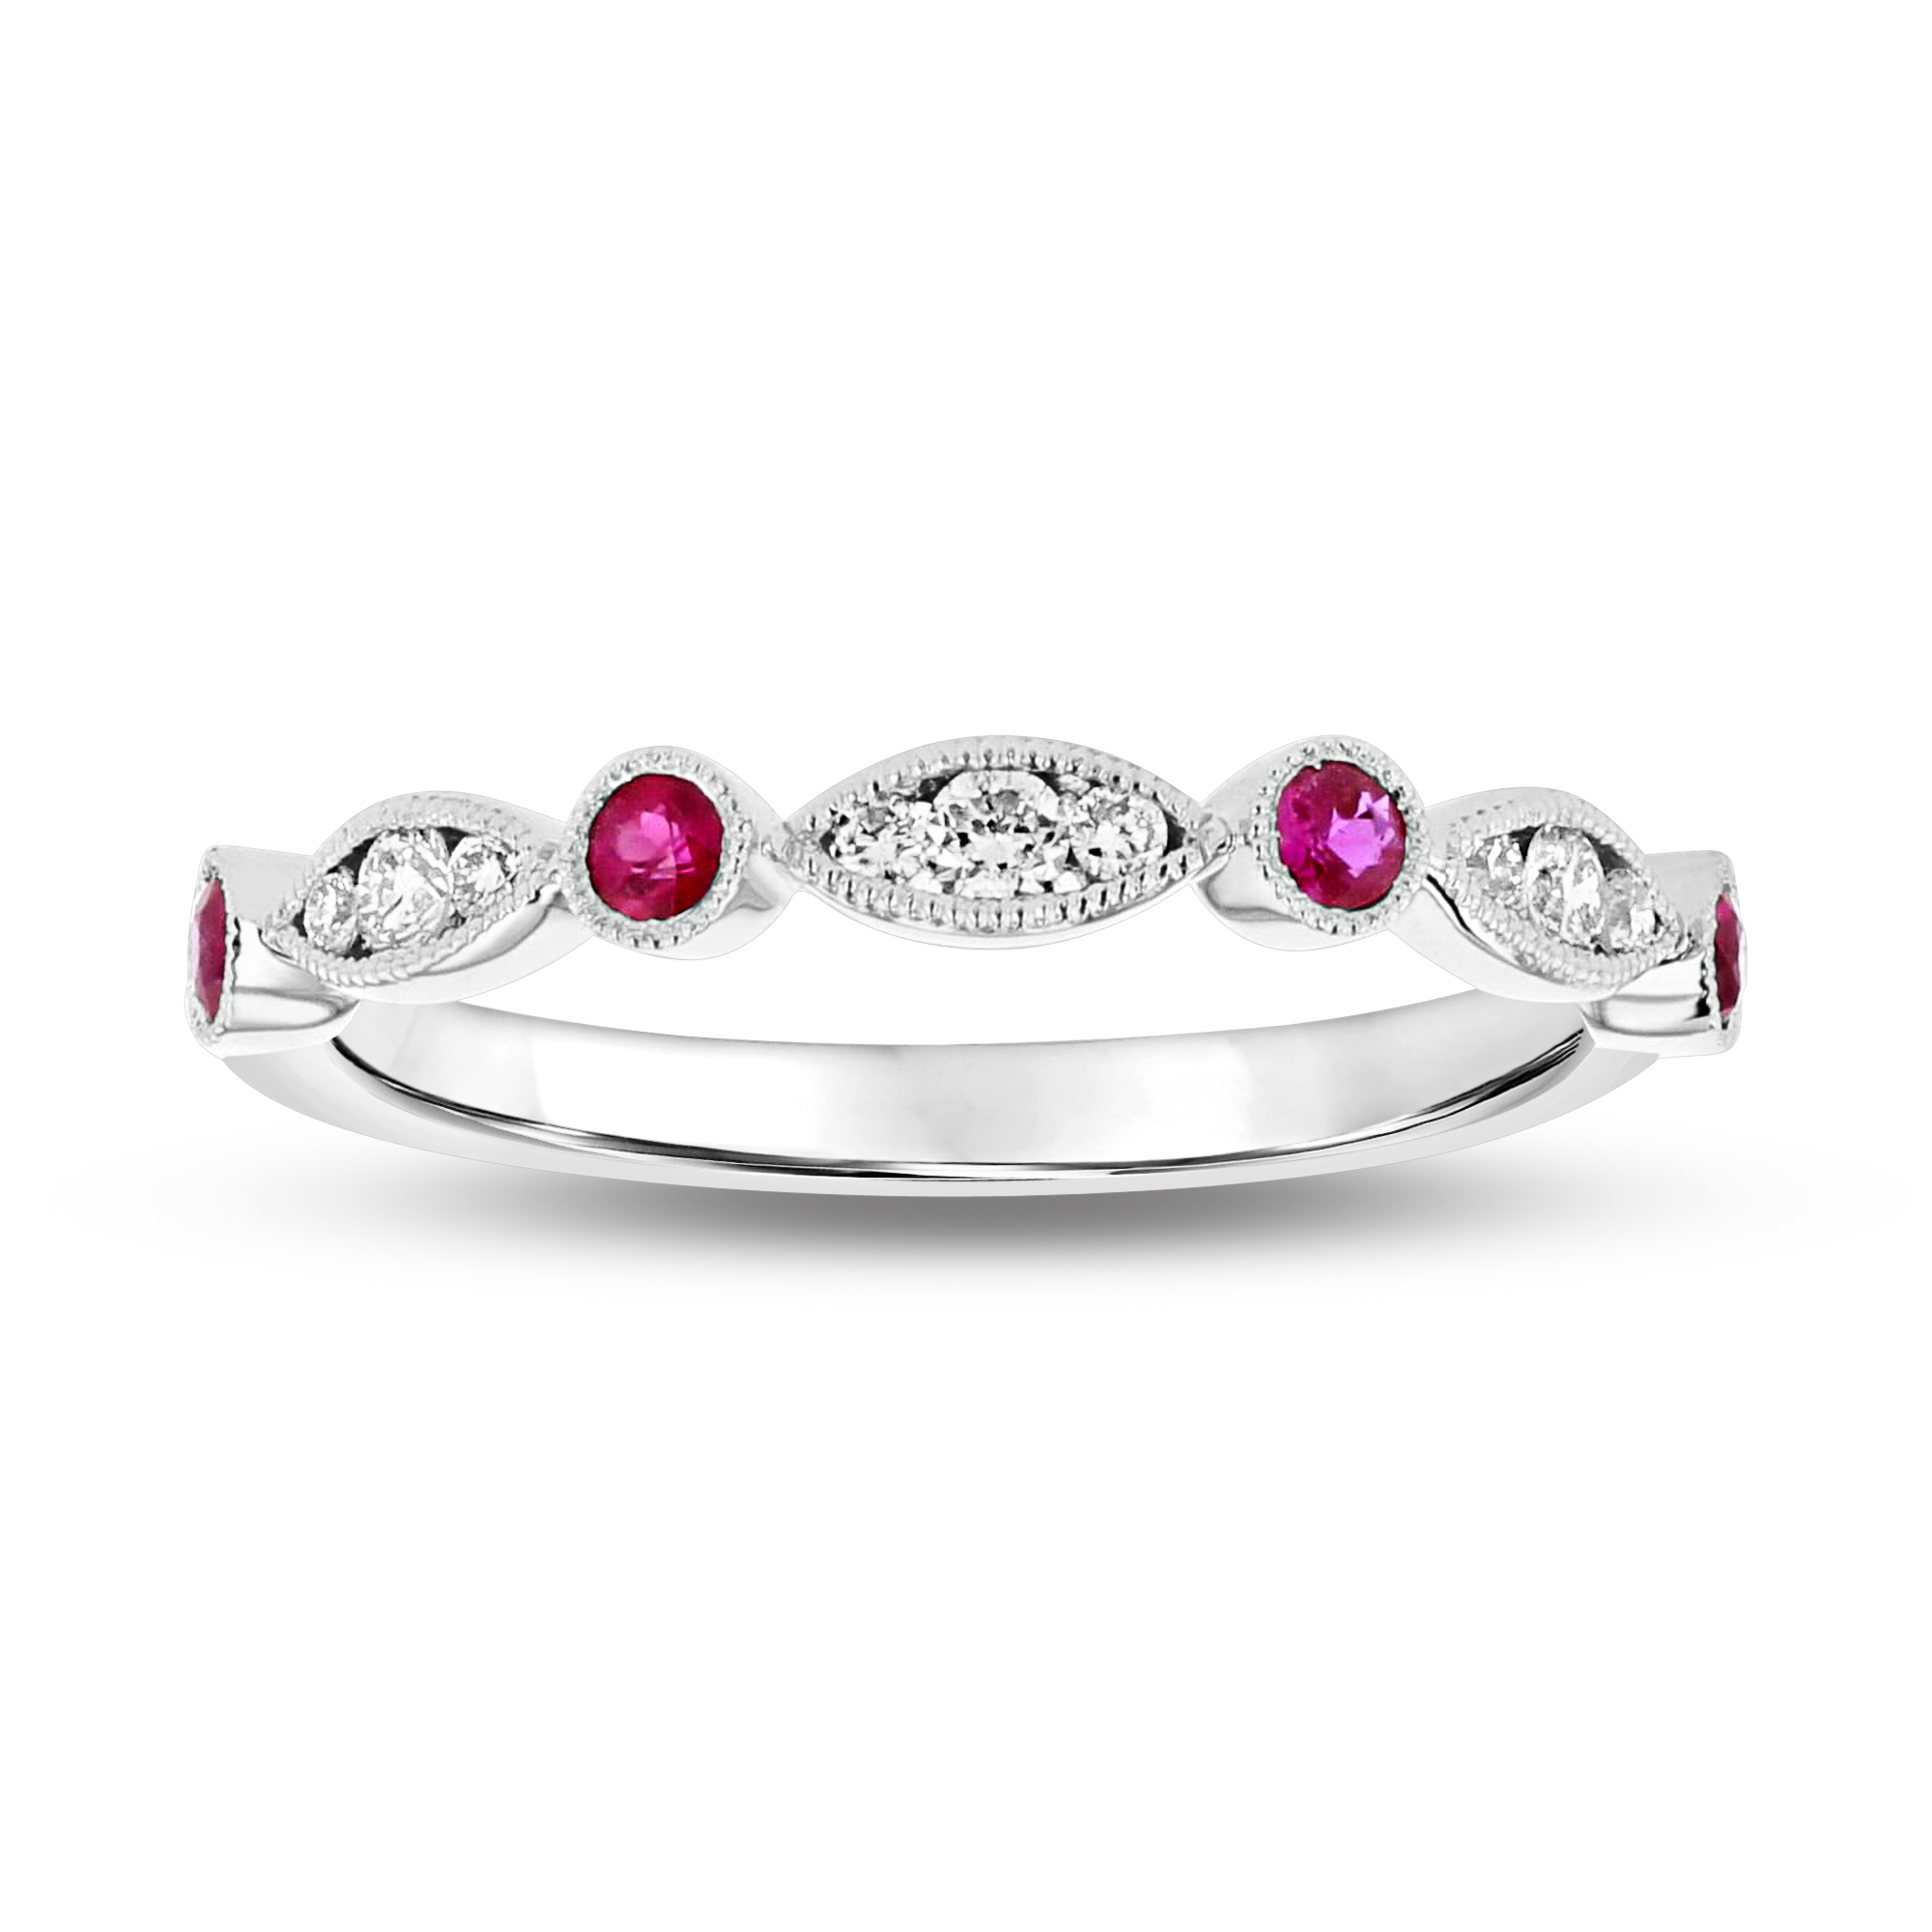 View 0.16ctw Diamond and Ruby Band in 18k White Gold